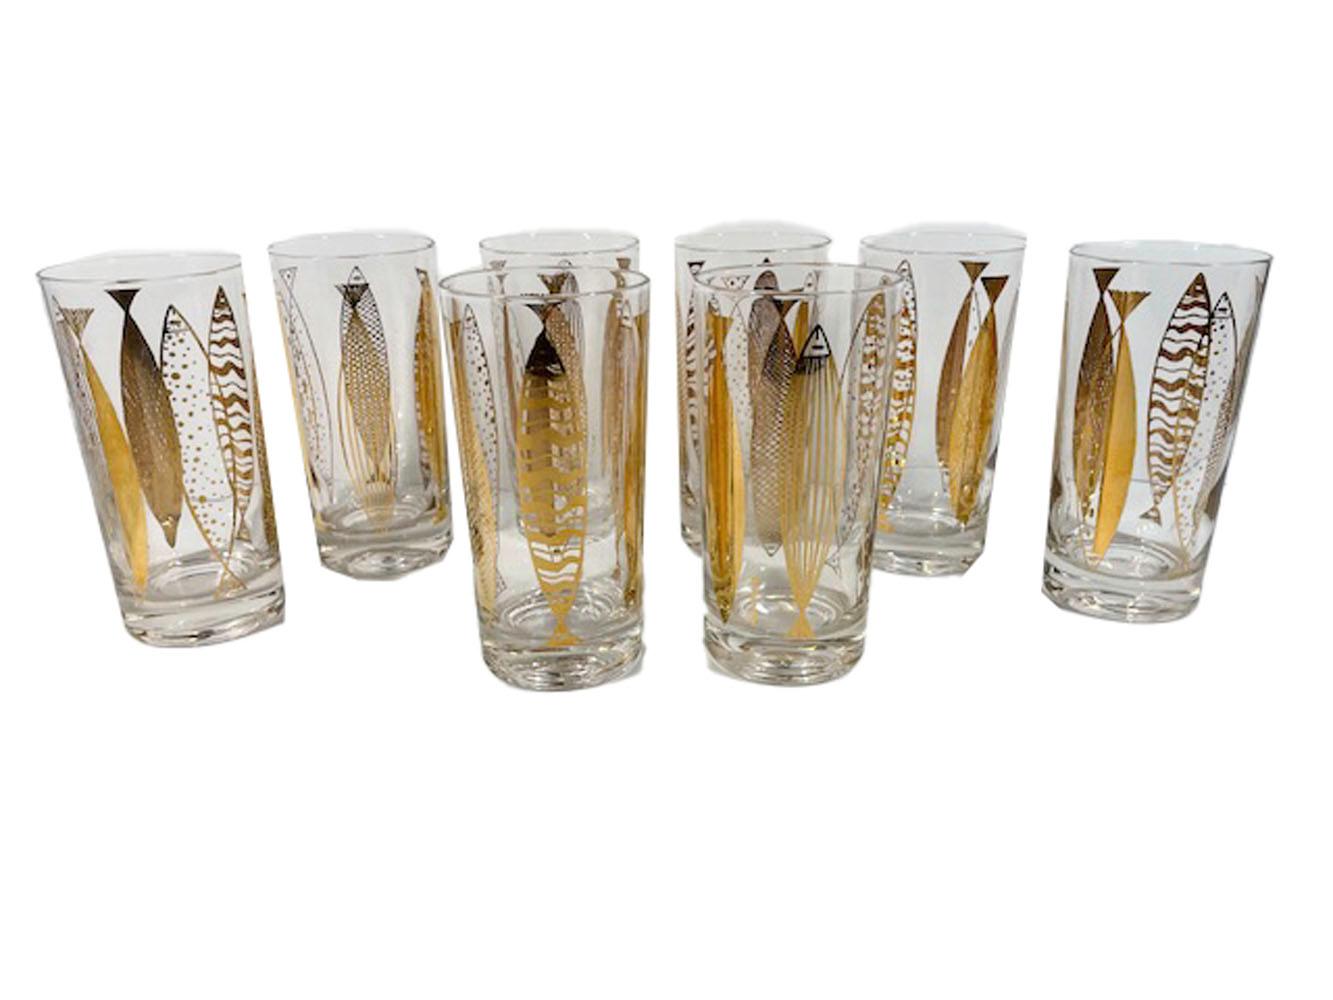 Eight Mid-Century Modern highball glasses designed by Fred Press, with 22k gold fish in six different abstract patterns, vertically placed around each glass.